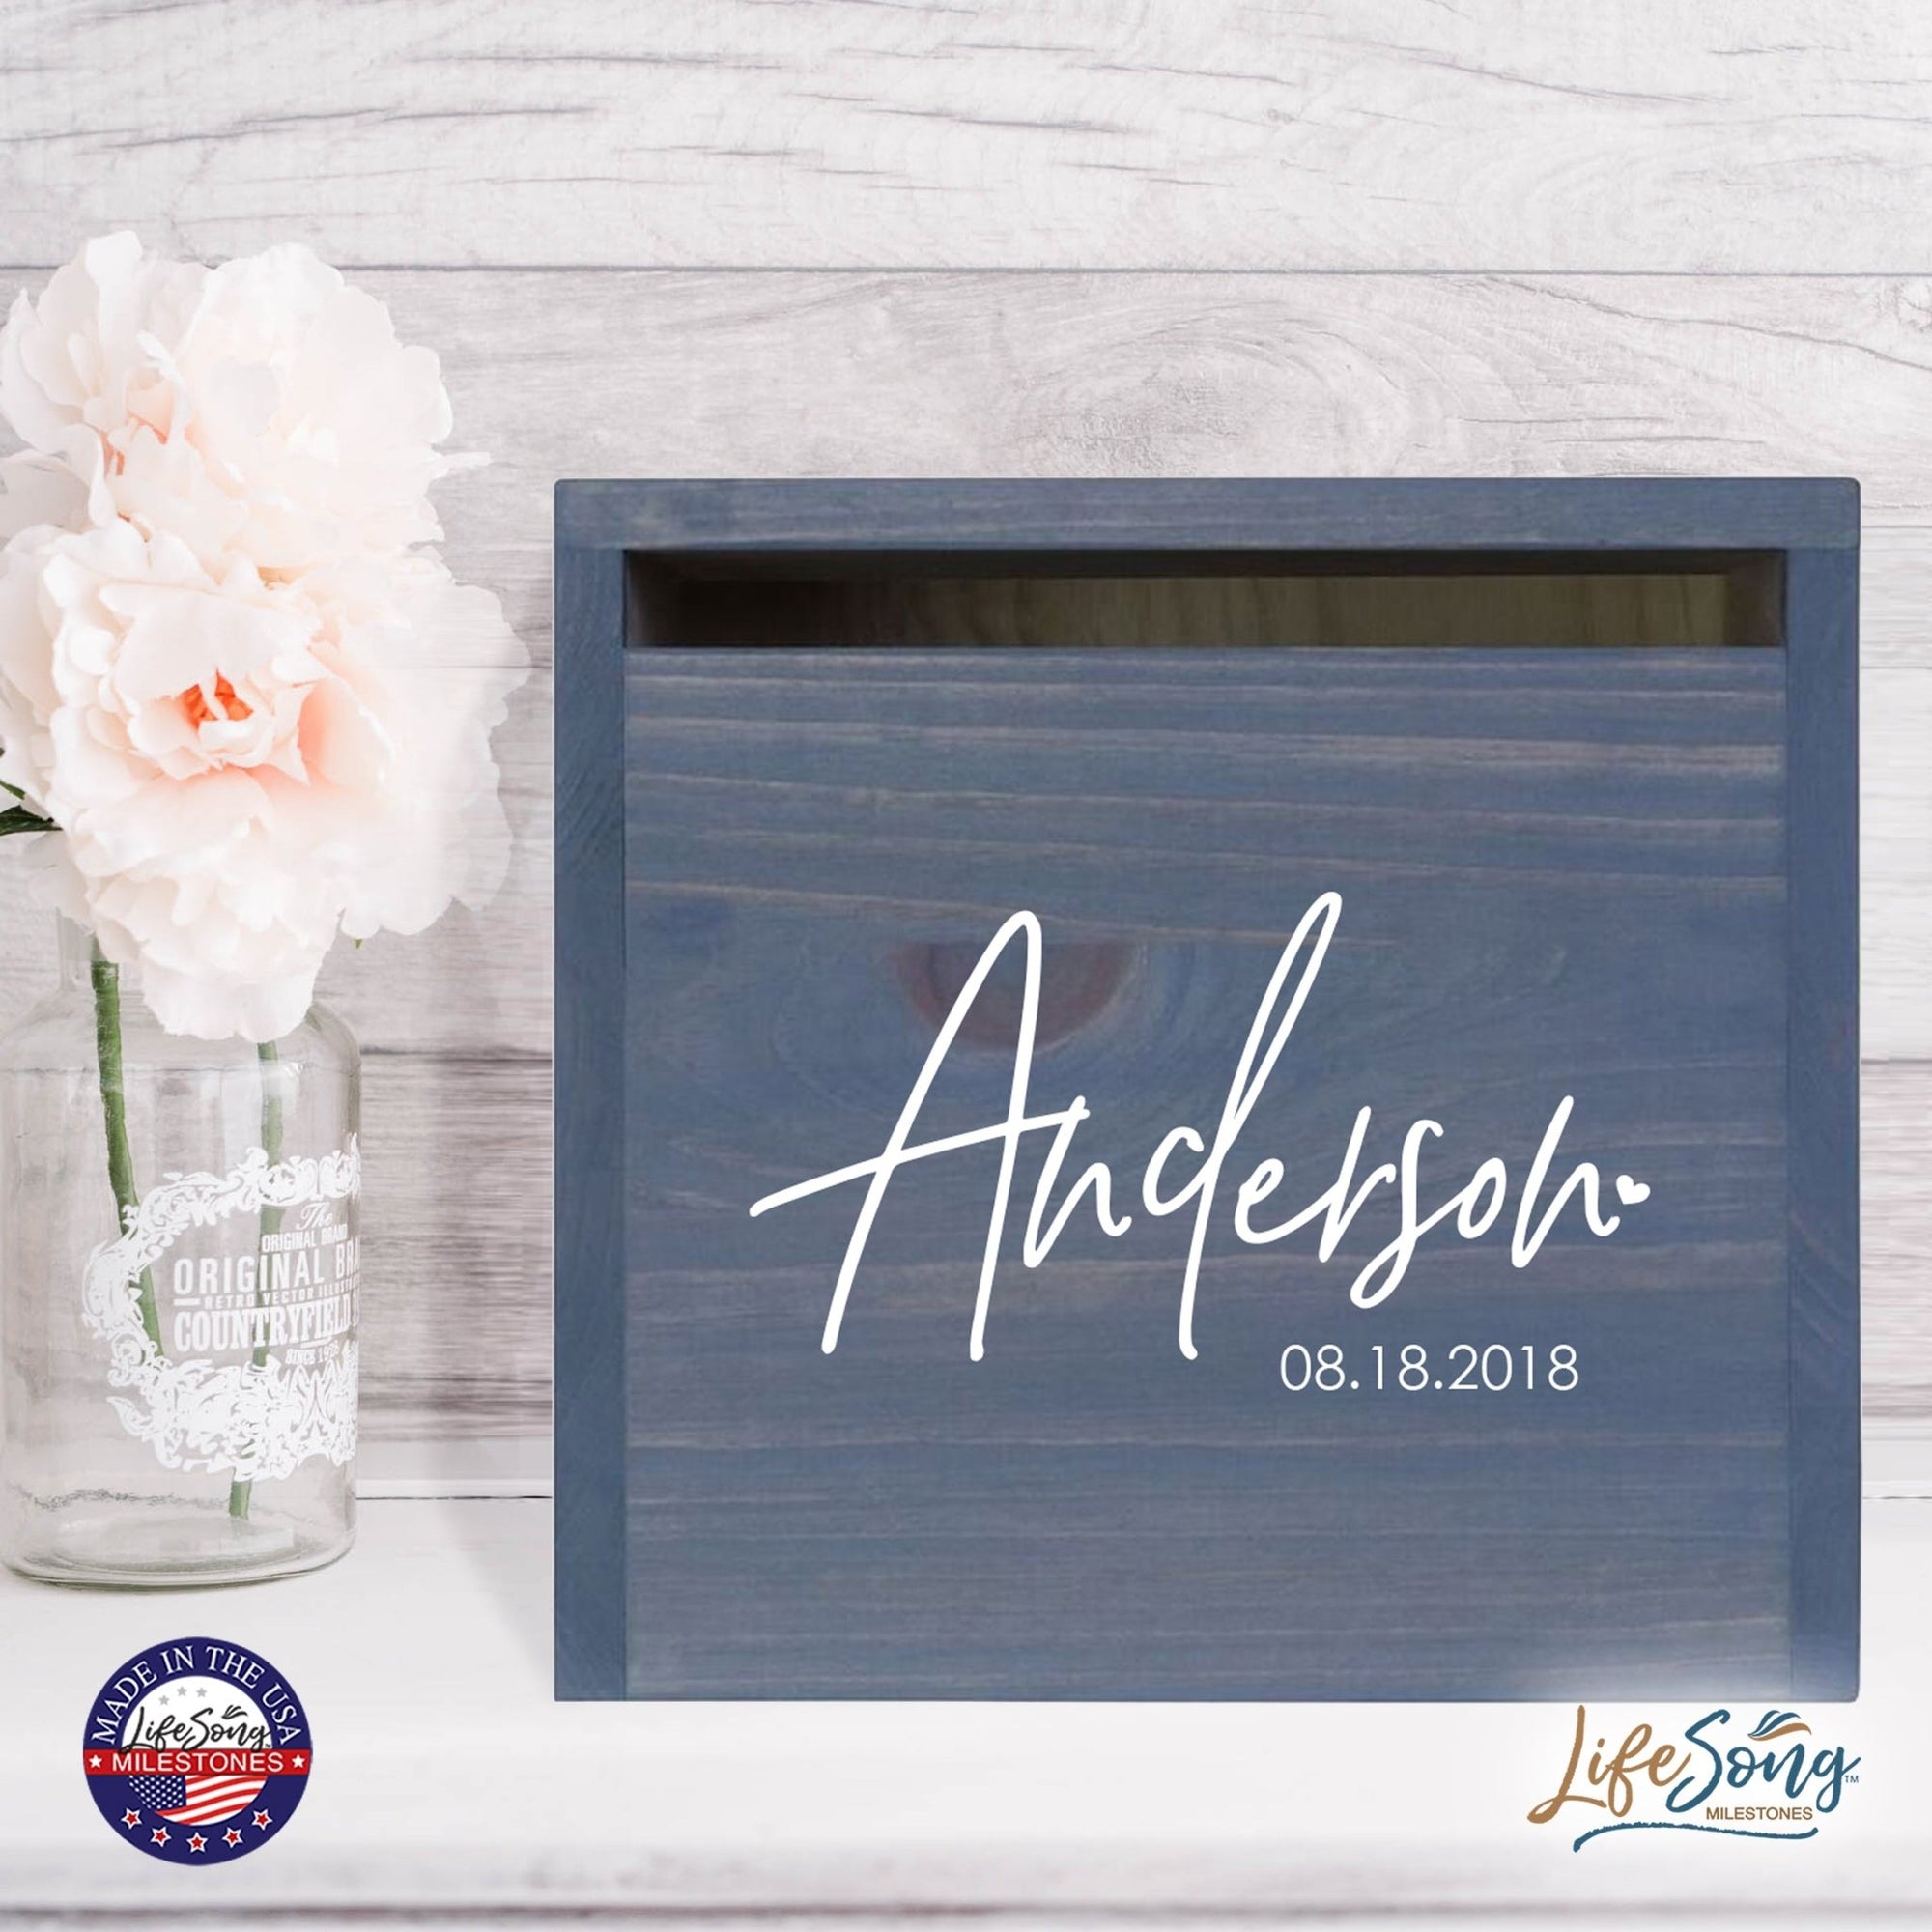 Personalized Wooden Card Box for Wedding Ceremonies, Venues, Receptions, Bridal Showers, and Engagement Parties 13.5x12 - Anderson (Heart) - LifeSong Milestones